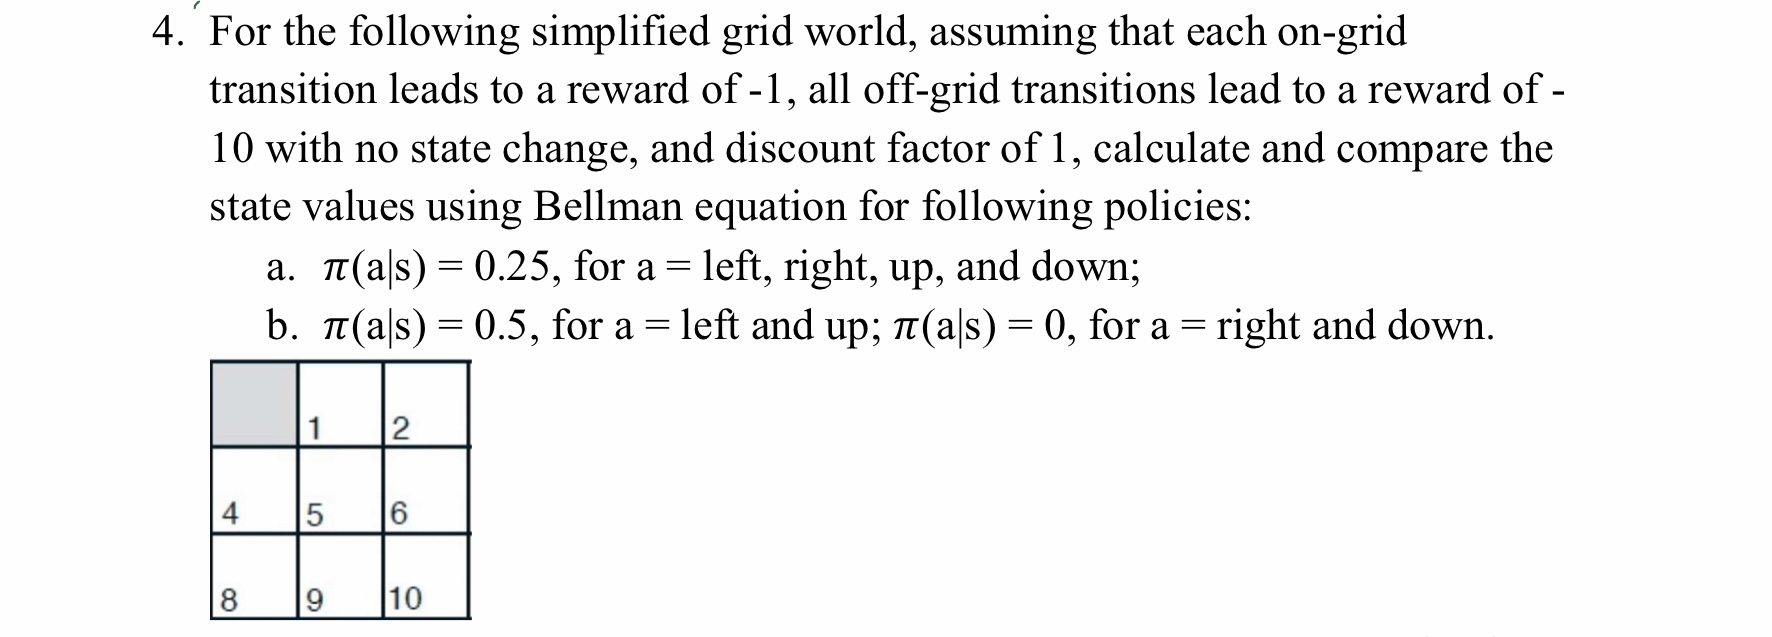 4. For the following simplified grid world, assuming that each on-grid transition leads to a reward of -1,